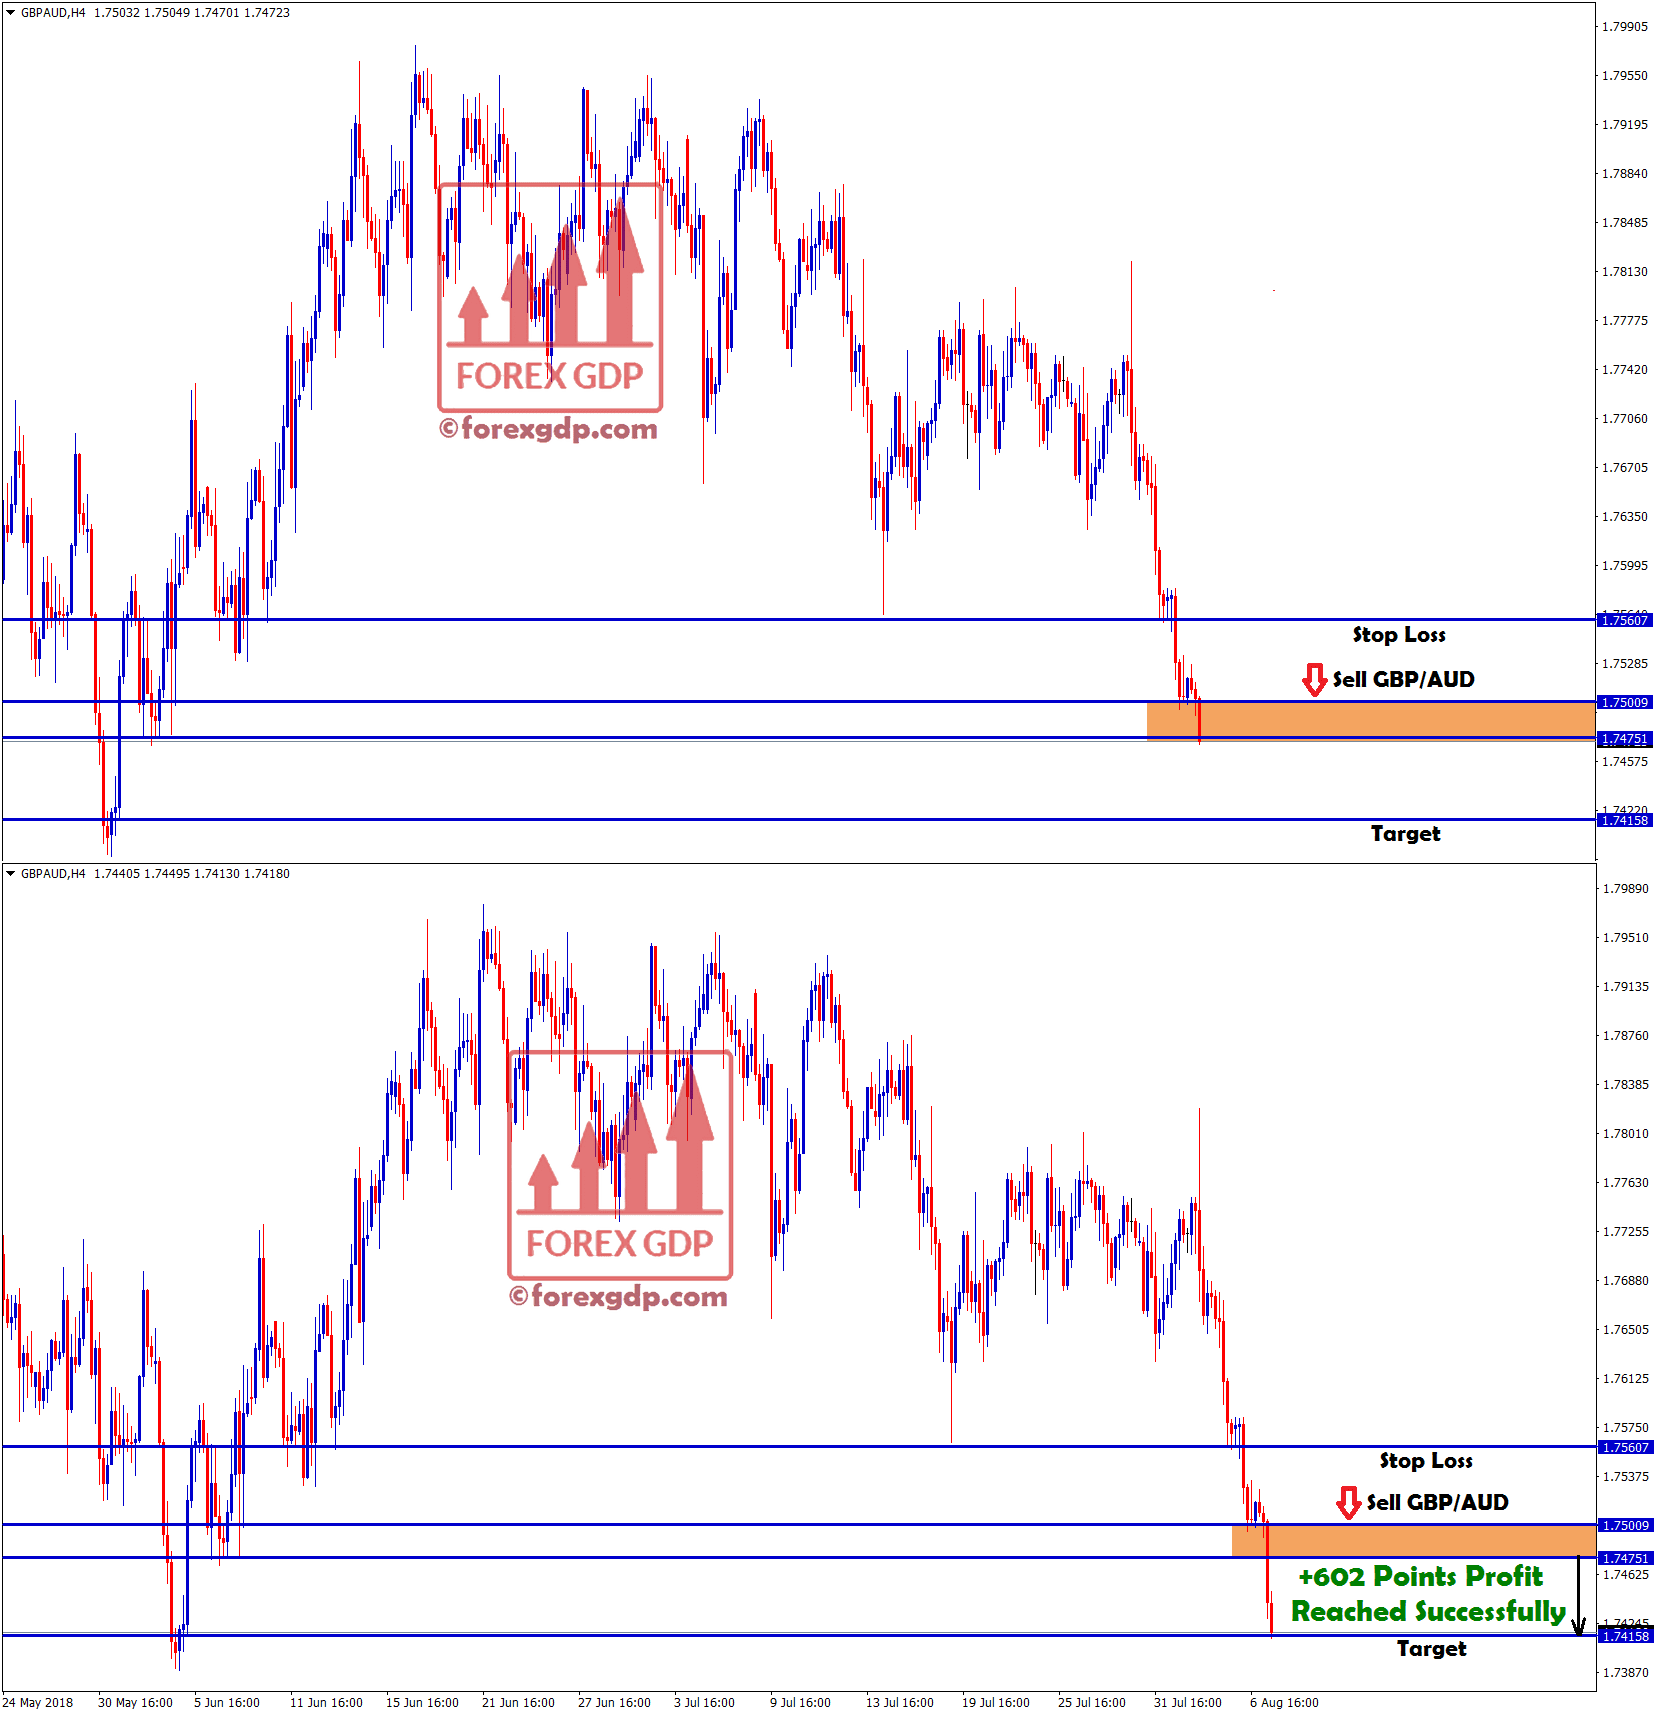 gbp aud sell signal hits our target with +602 points profit